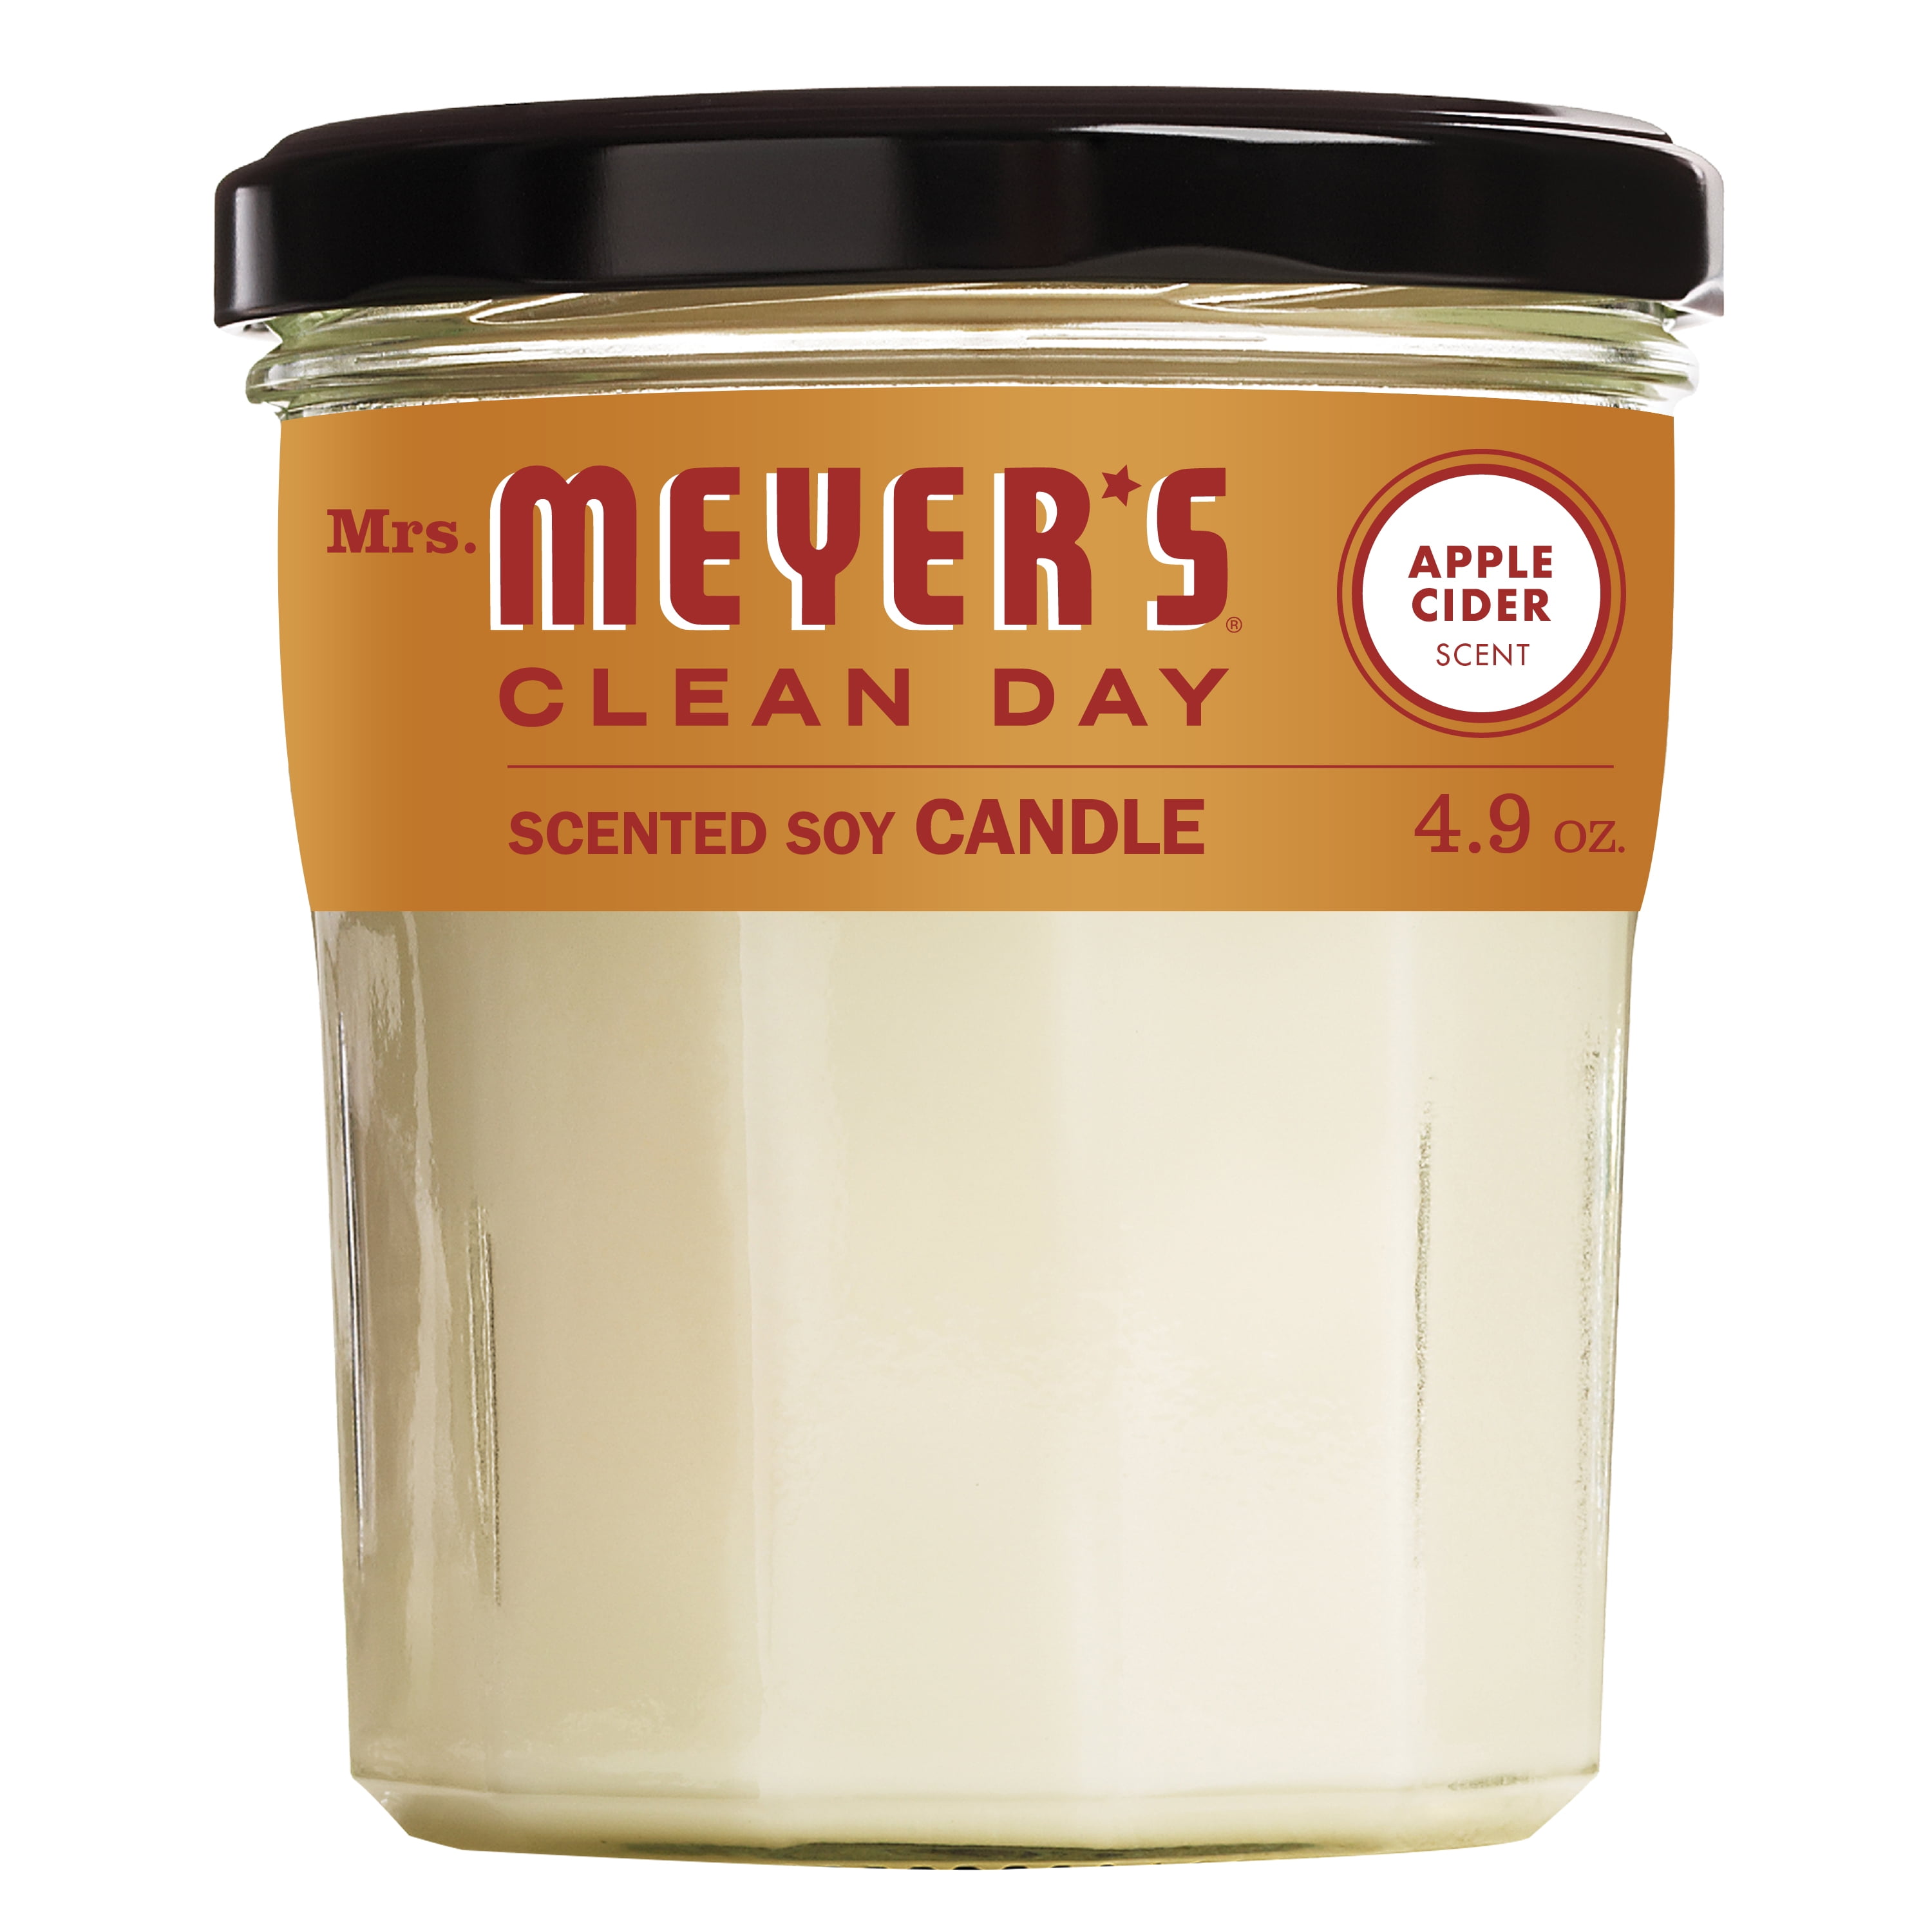 Mrs Apple Cider Scent 4.9 Ounce Candle Meyer’s Clean Day Scented Soy Candle